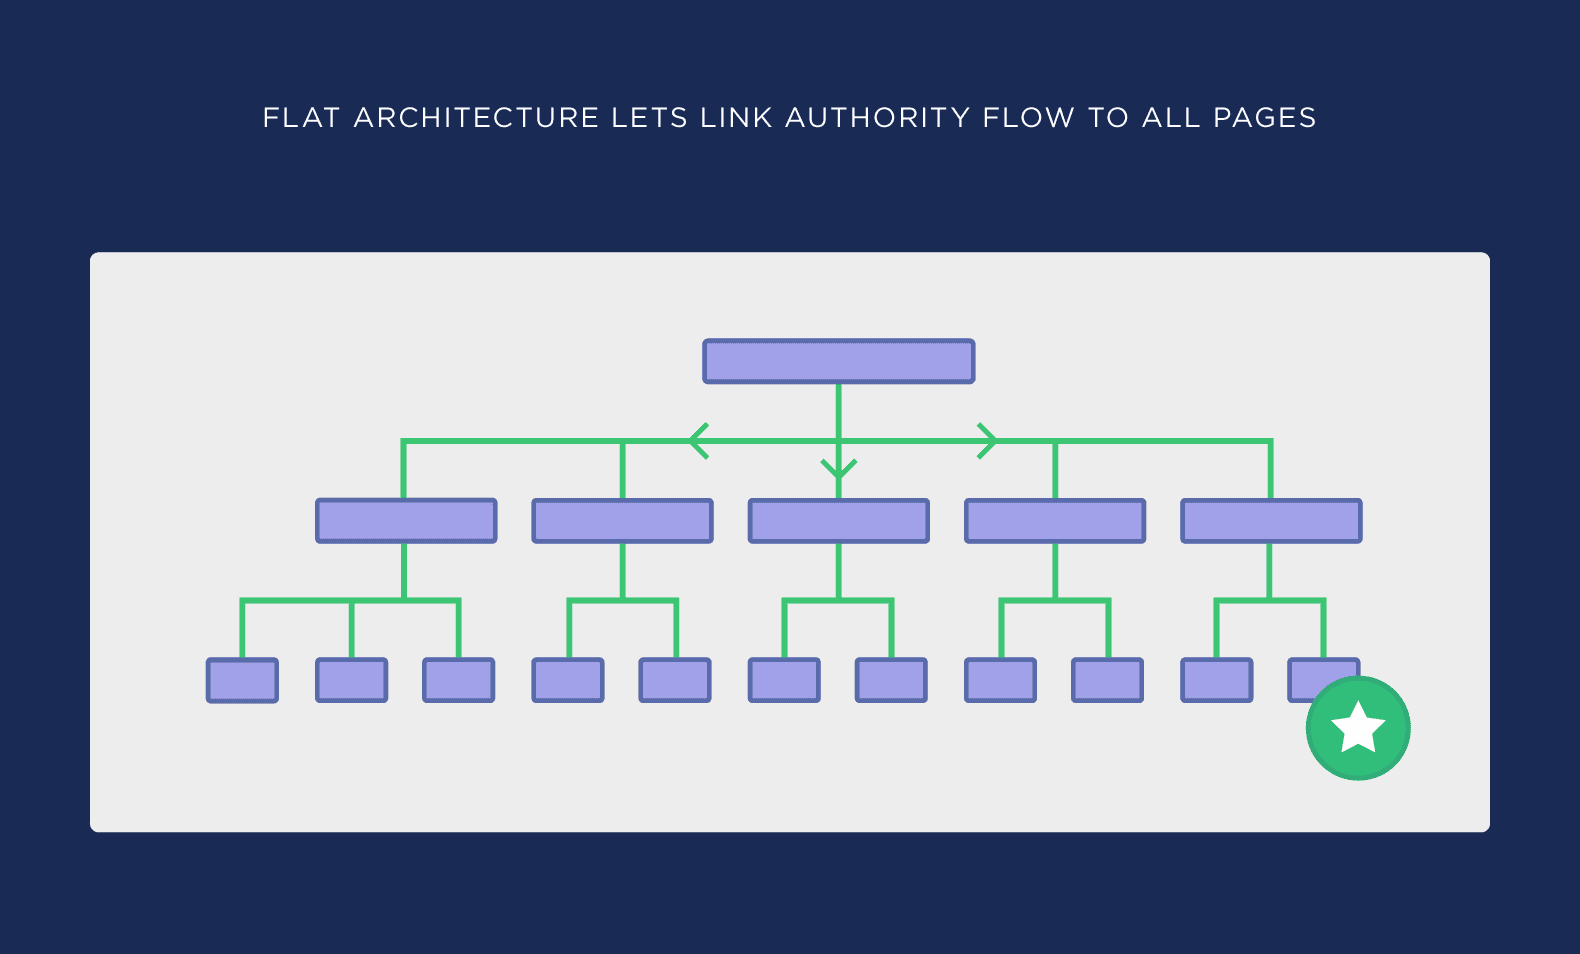 Flat architecture lets link authority flow to all pages